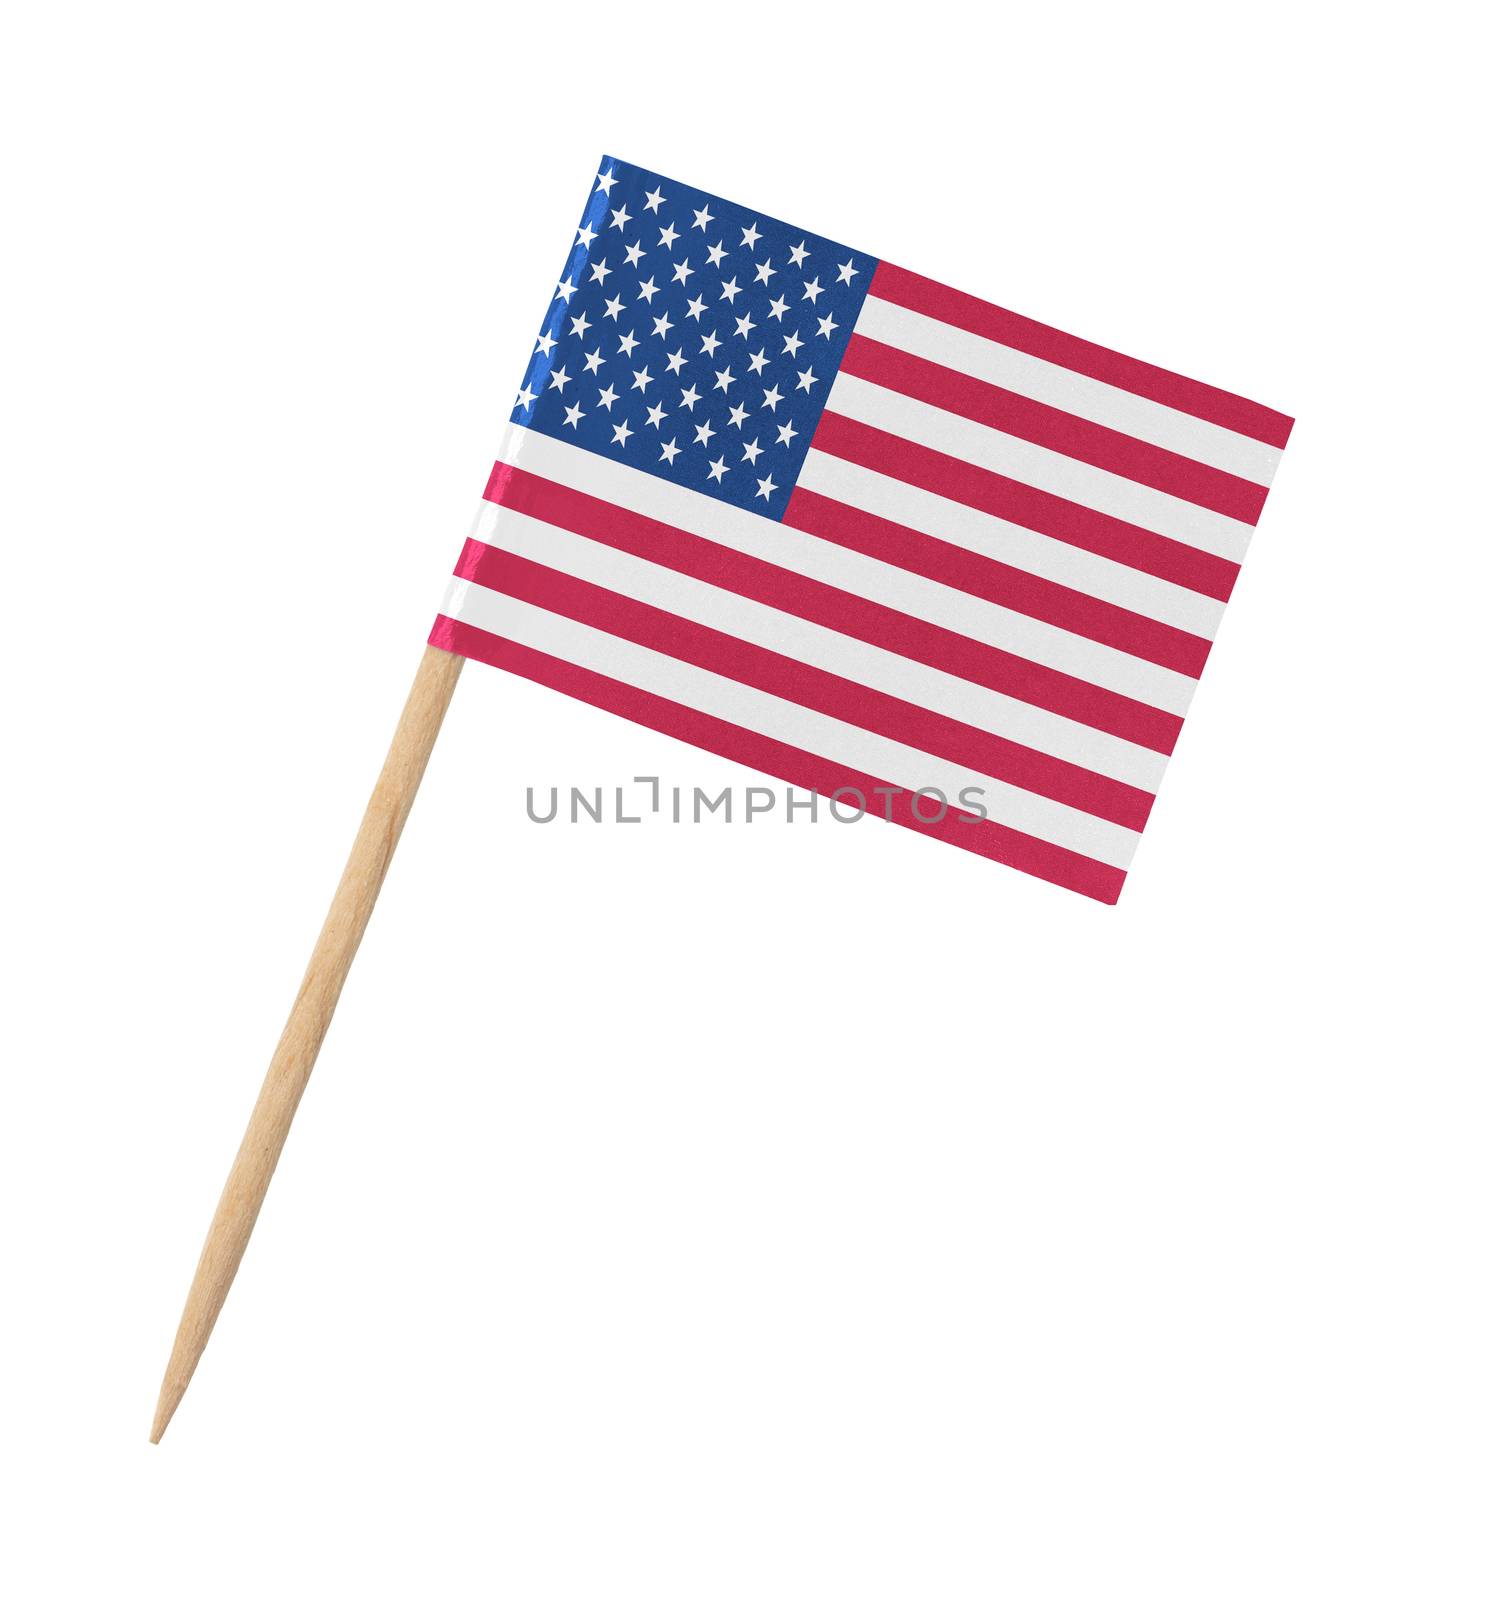 Small paper American flag on wooden stick by michaklootwijk